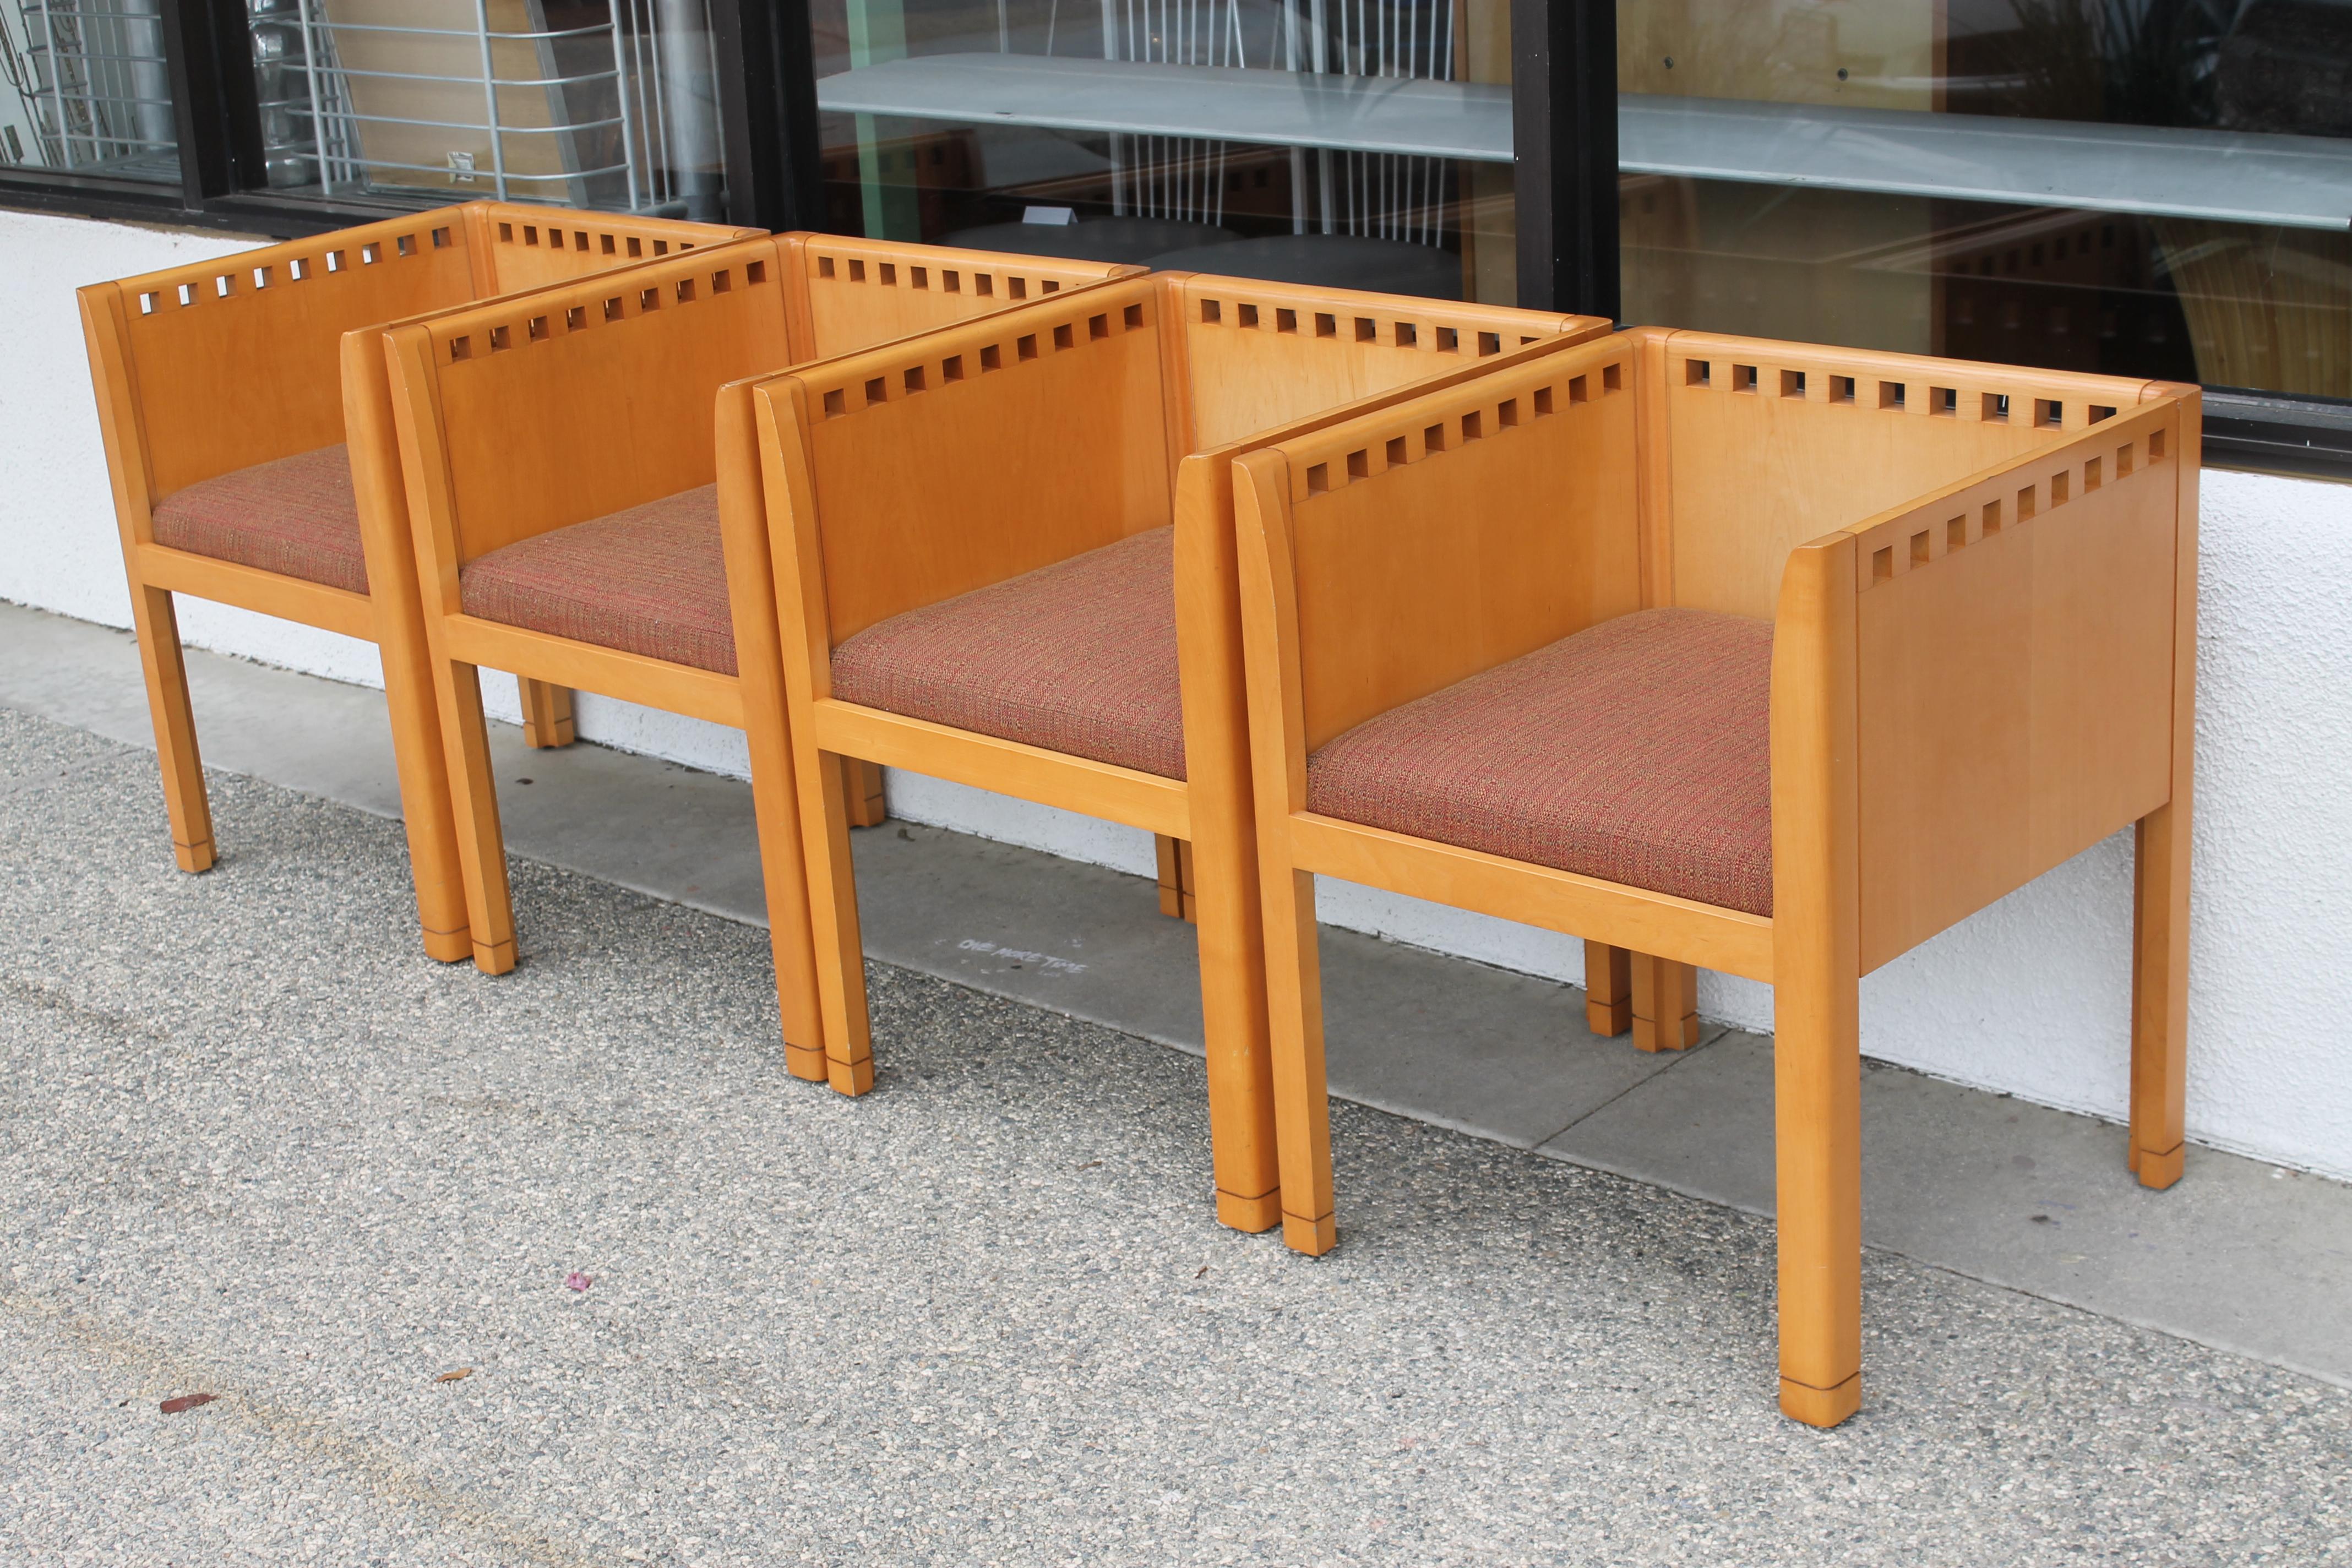 Four chairs by the Metropolitan Furniture Corporation. Label says Metropolitan Furniture Corporation member Steelcase Design Partnership, CA. Each chair measures 22.5